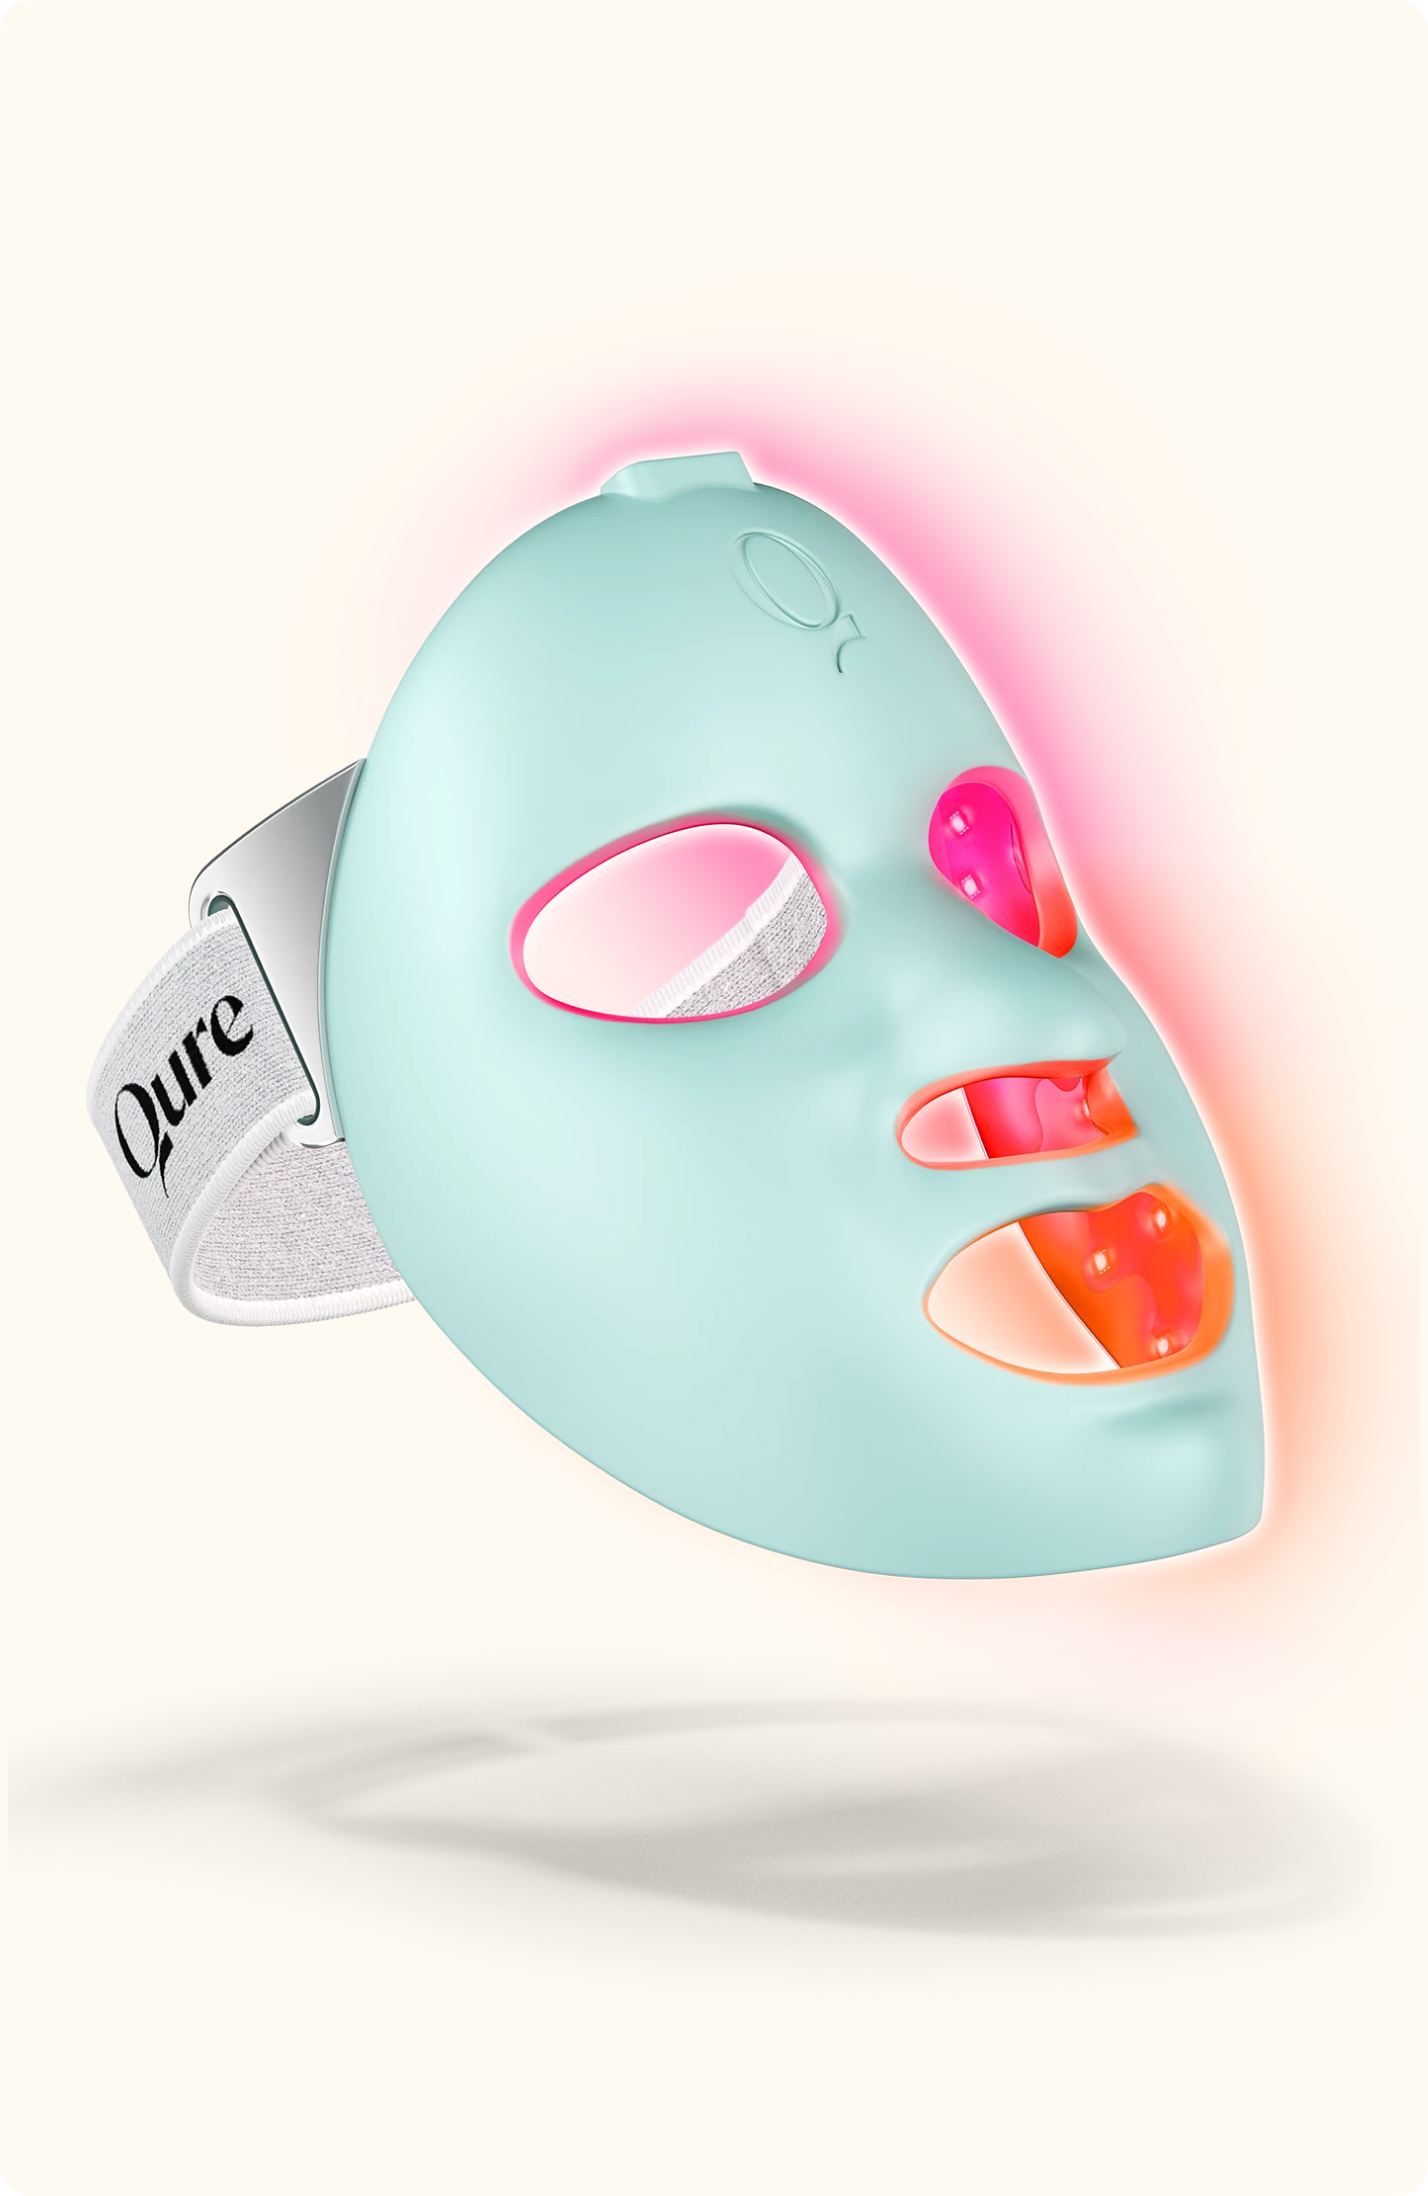 Qure LED Mask Review